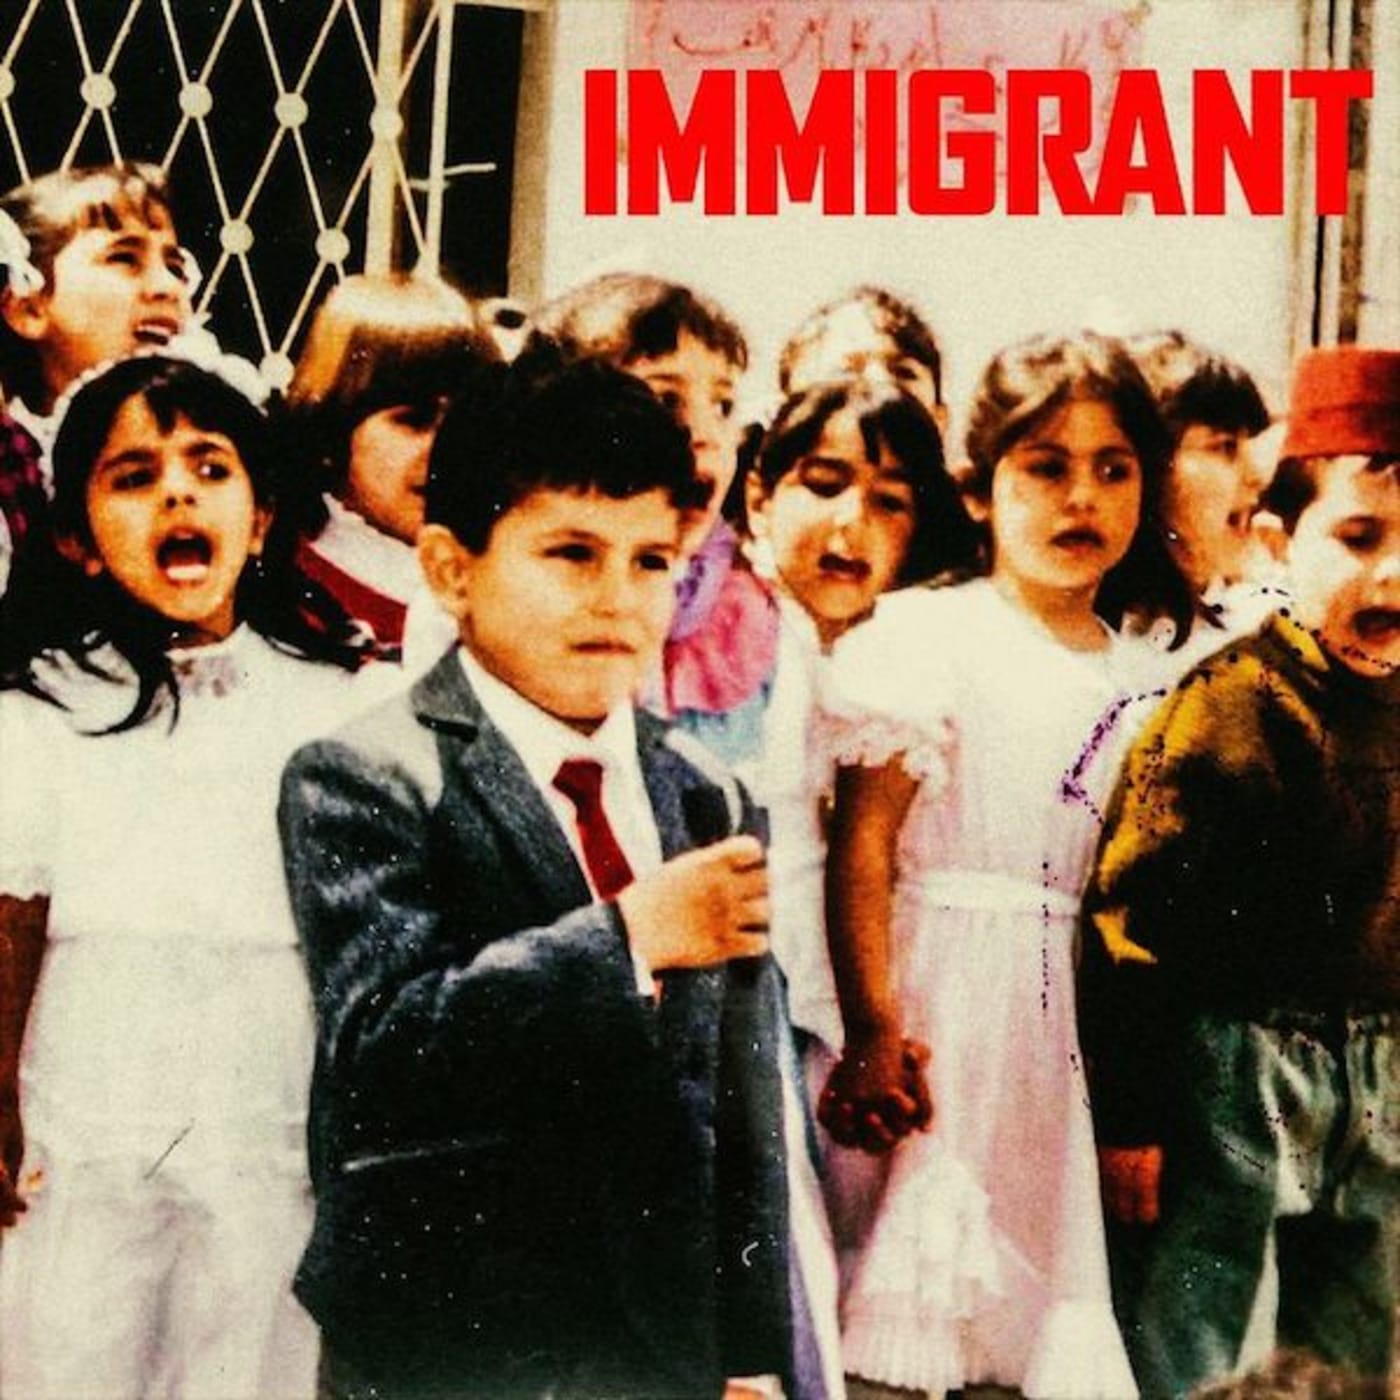 Belly 'Immigrant'